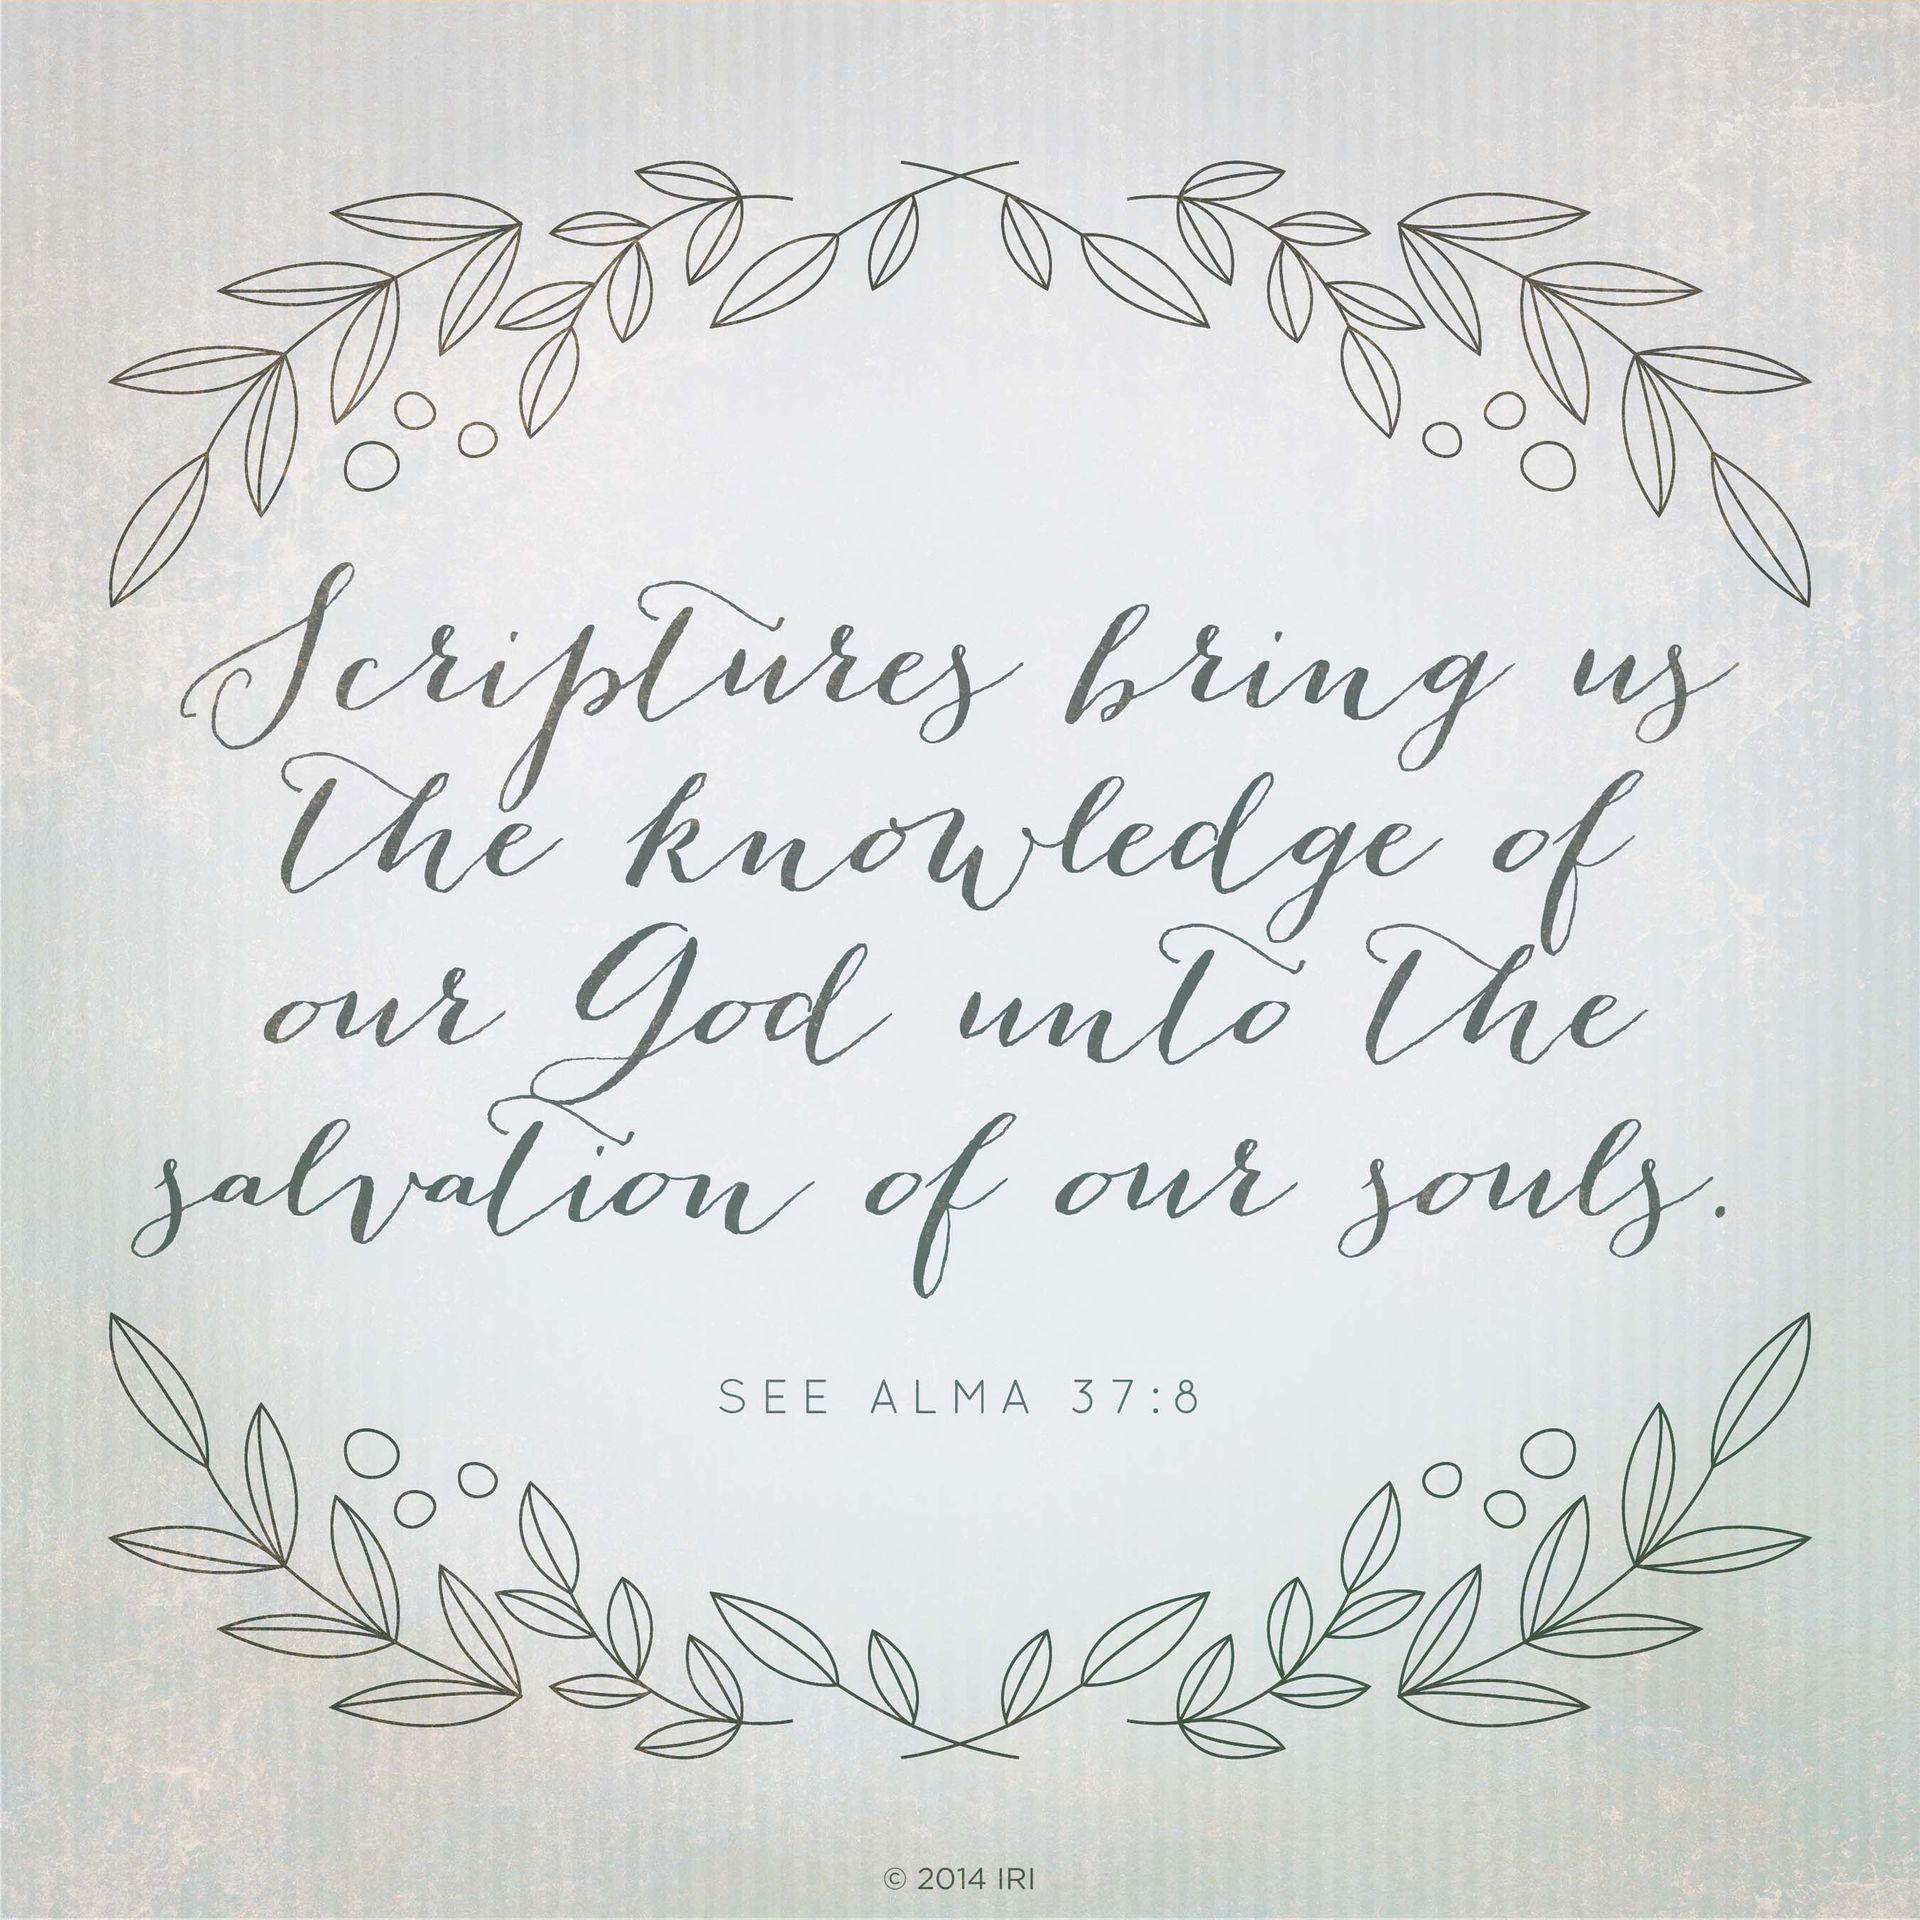 Scriptures bring us the knowledge of our God unto the salvation of our souls.—See Alma 37:8